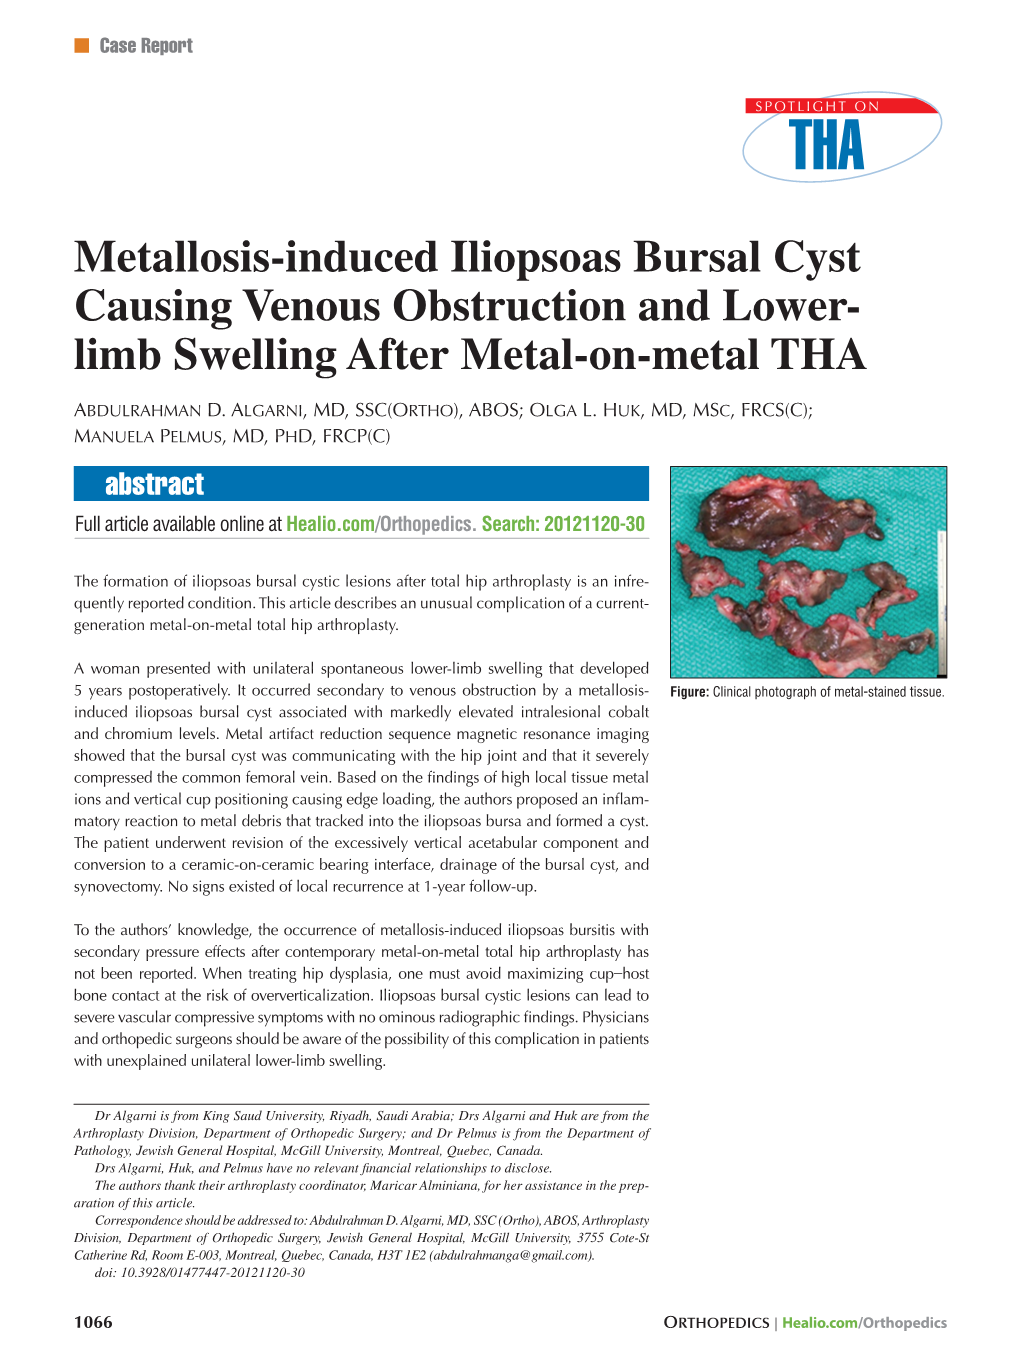 Metallosis-Induced Iliopsoas Bursal Cyst Causing Venous Obstruction and Lower- Limb Swelling After Metal-On-Metal THA